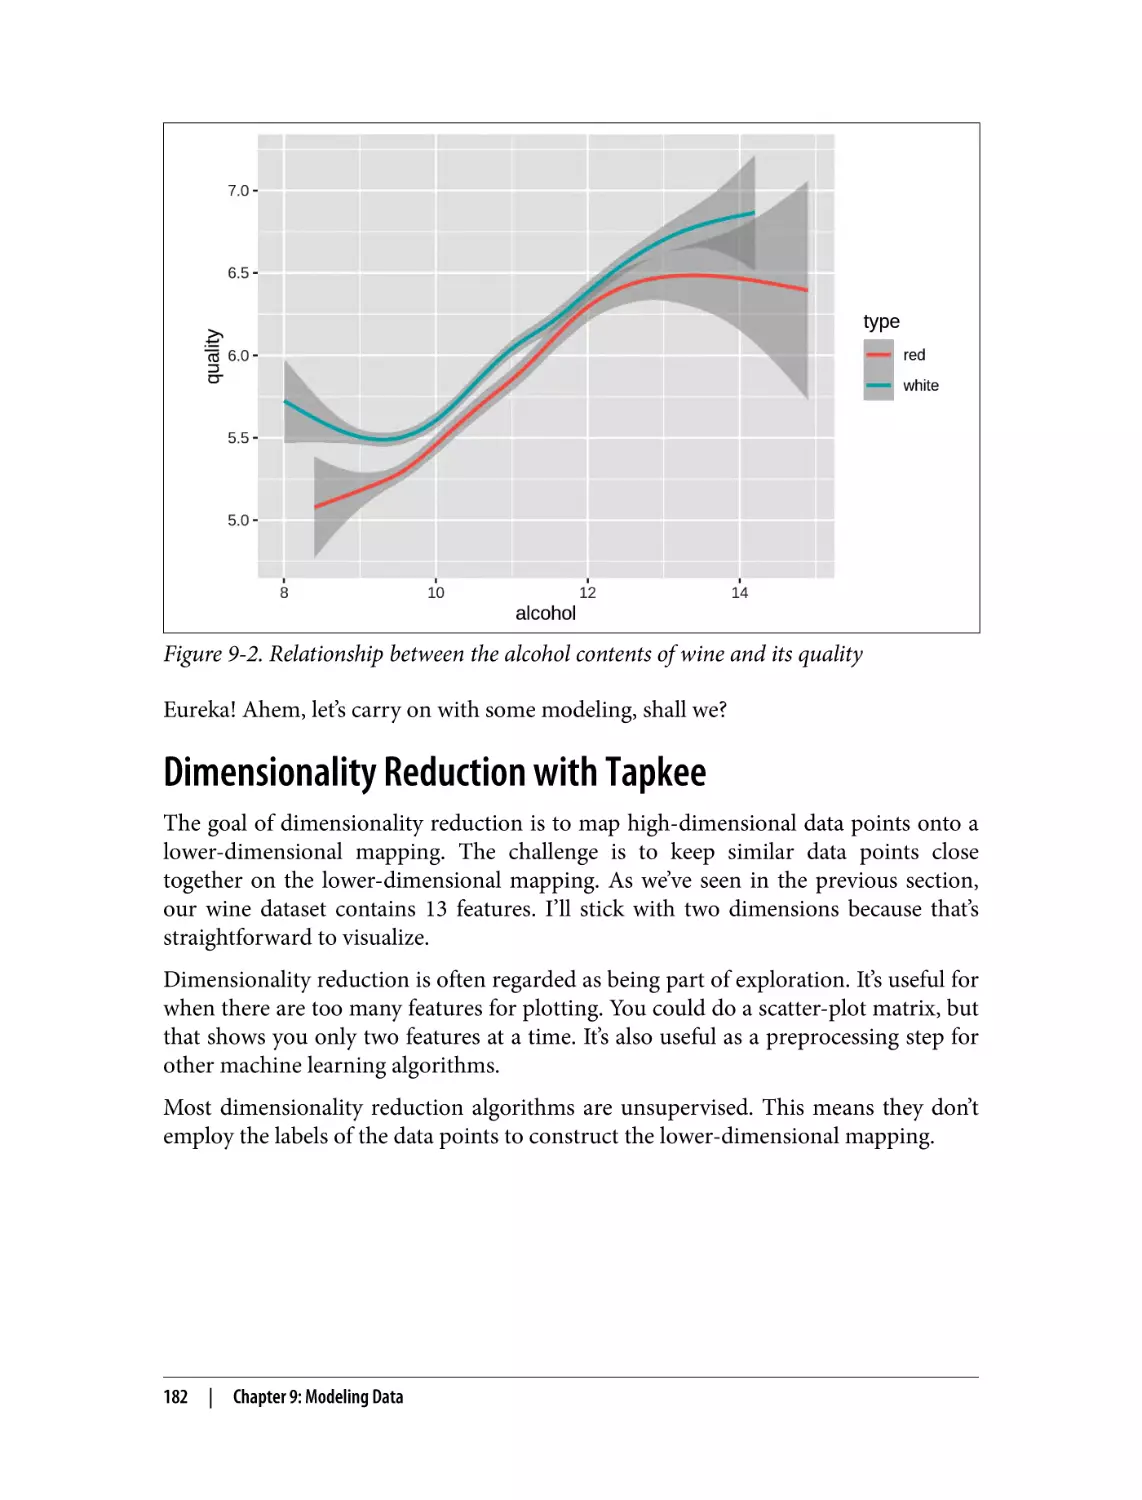 Dimensionality Reduction with Tapkee